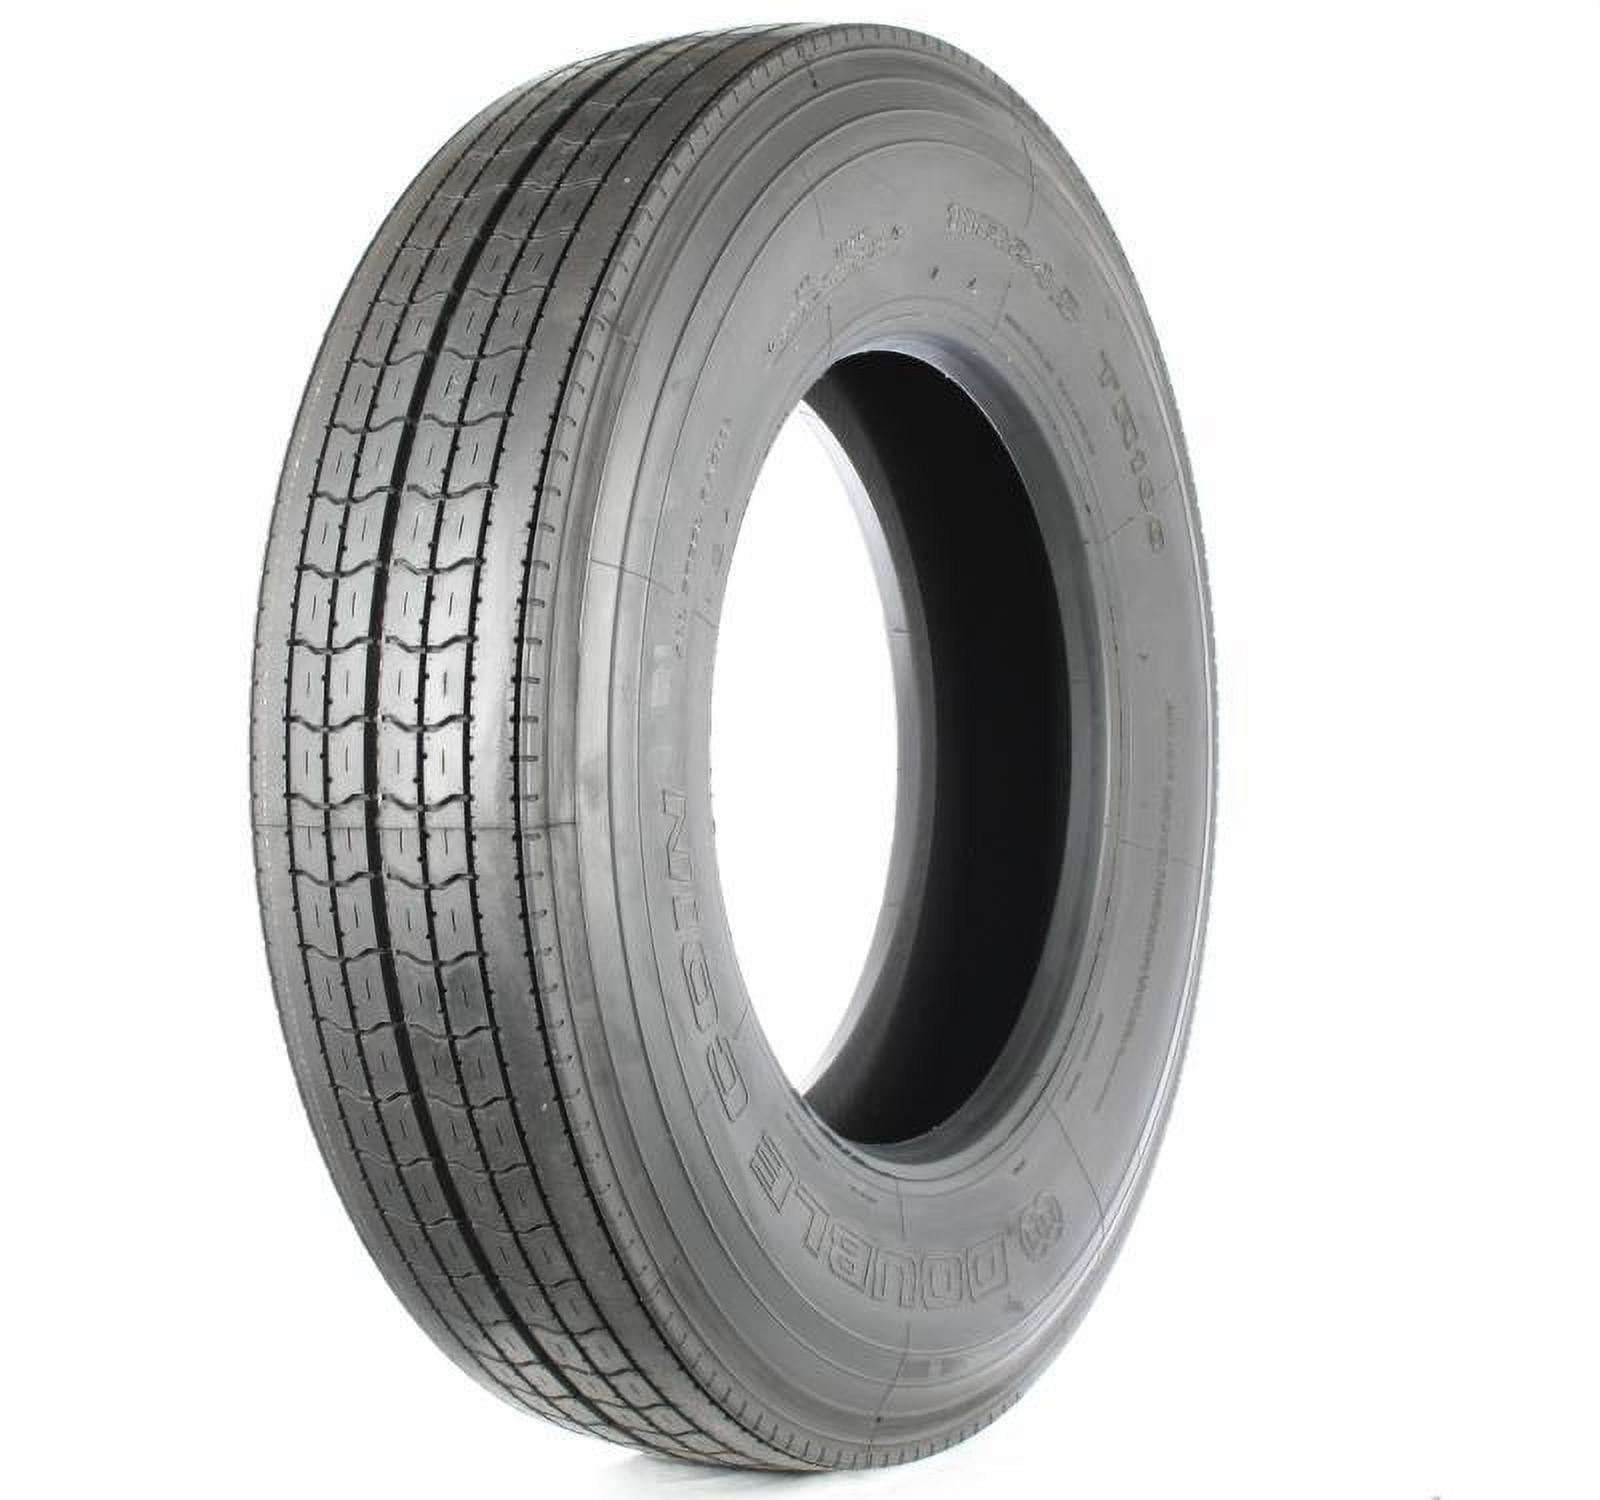 Double Coin RLB400 Commercial Truck Tire 11R22.5 148J 